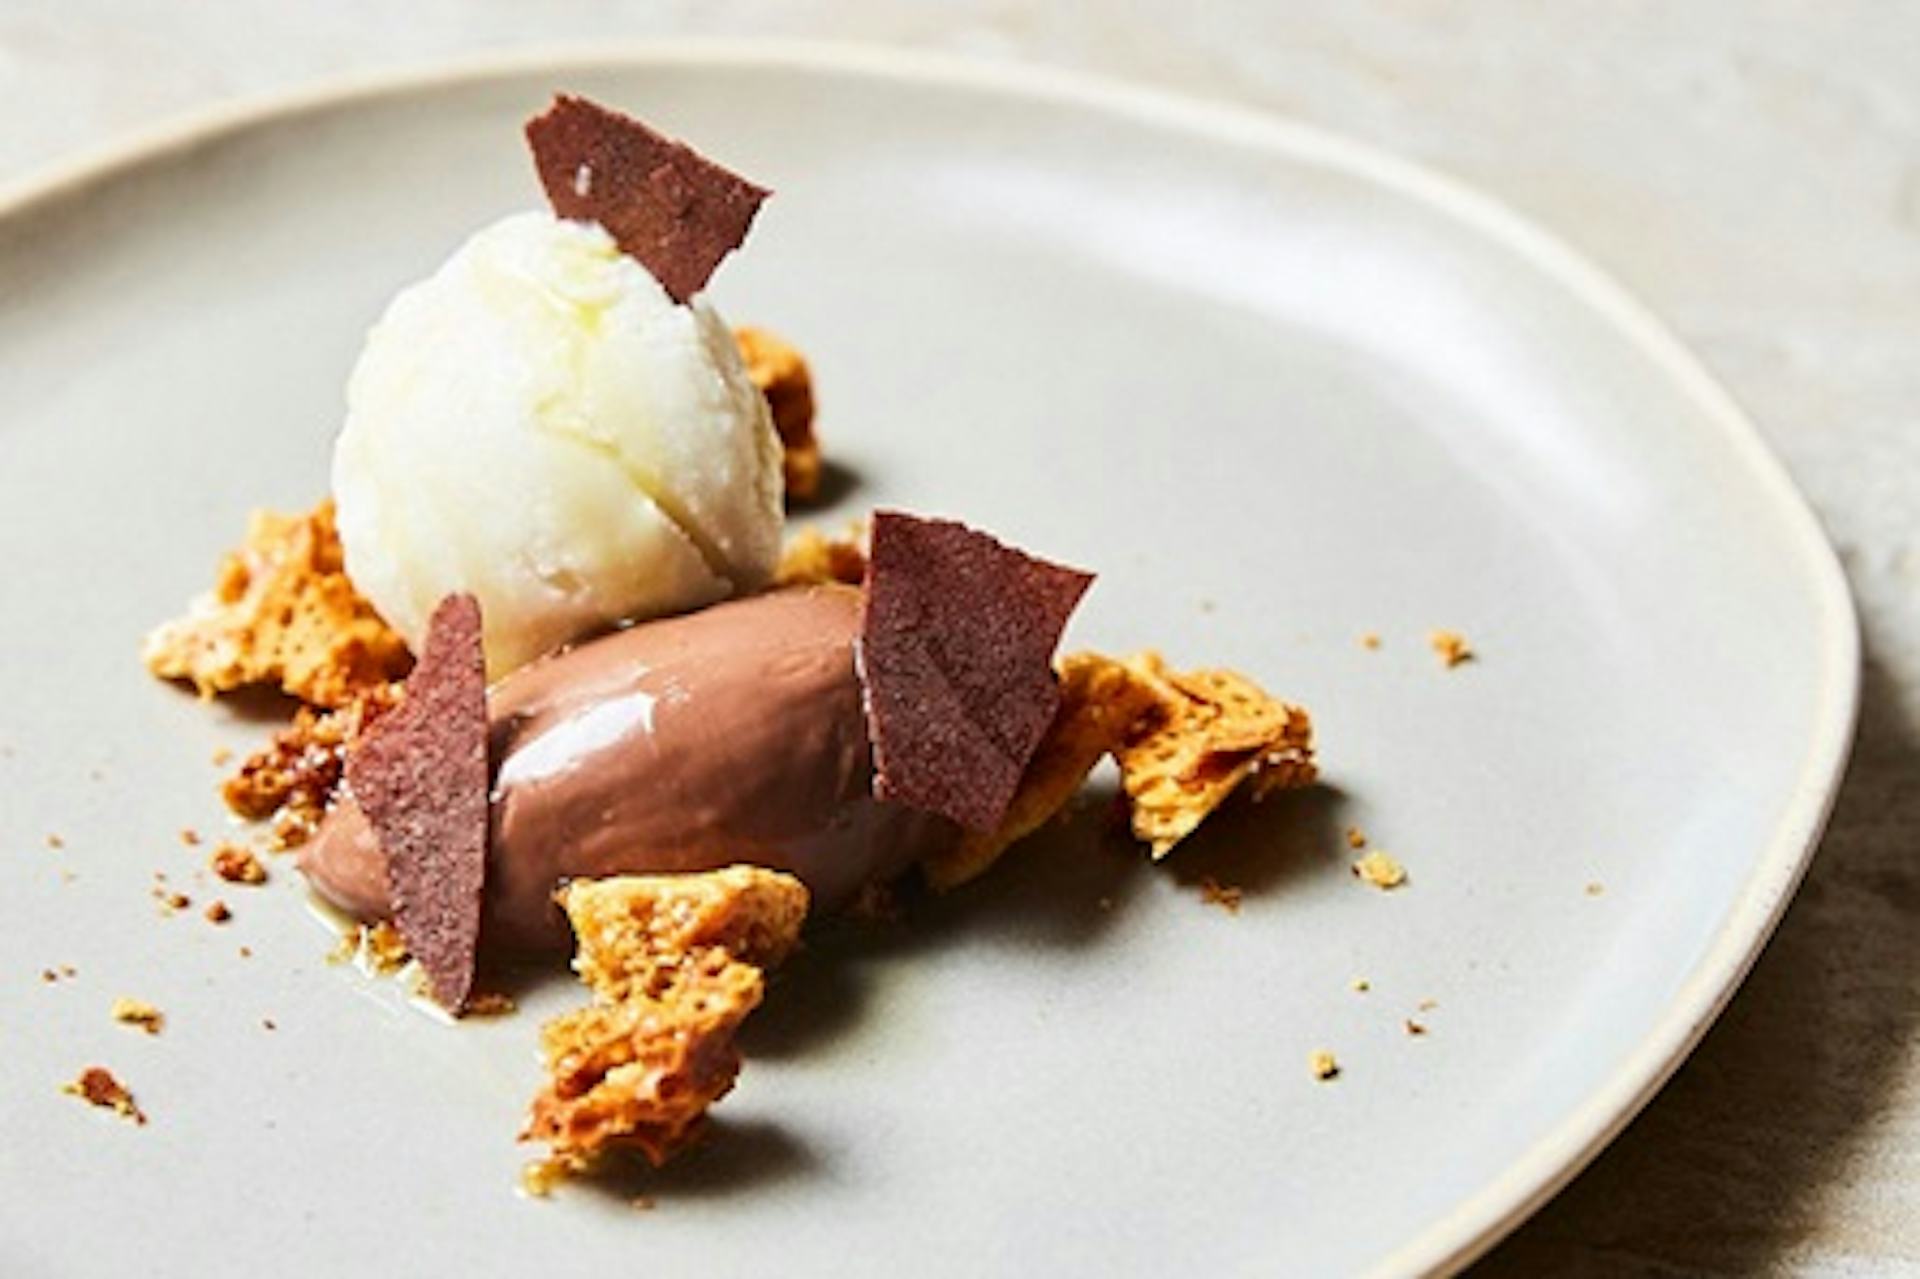 Six Course Seasonal Tasting Menu for Two at The Petersham, Covent Garden